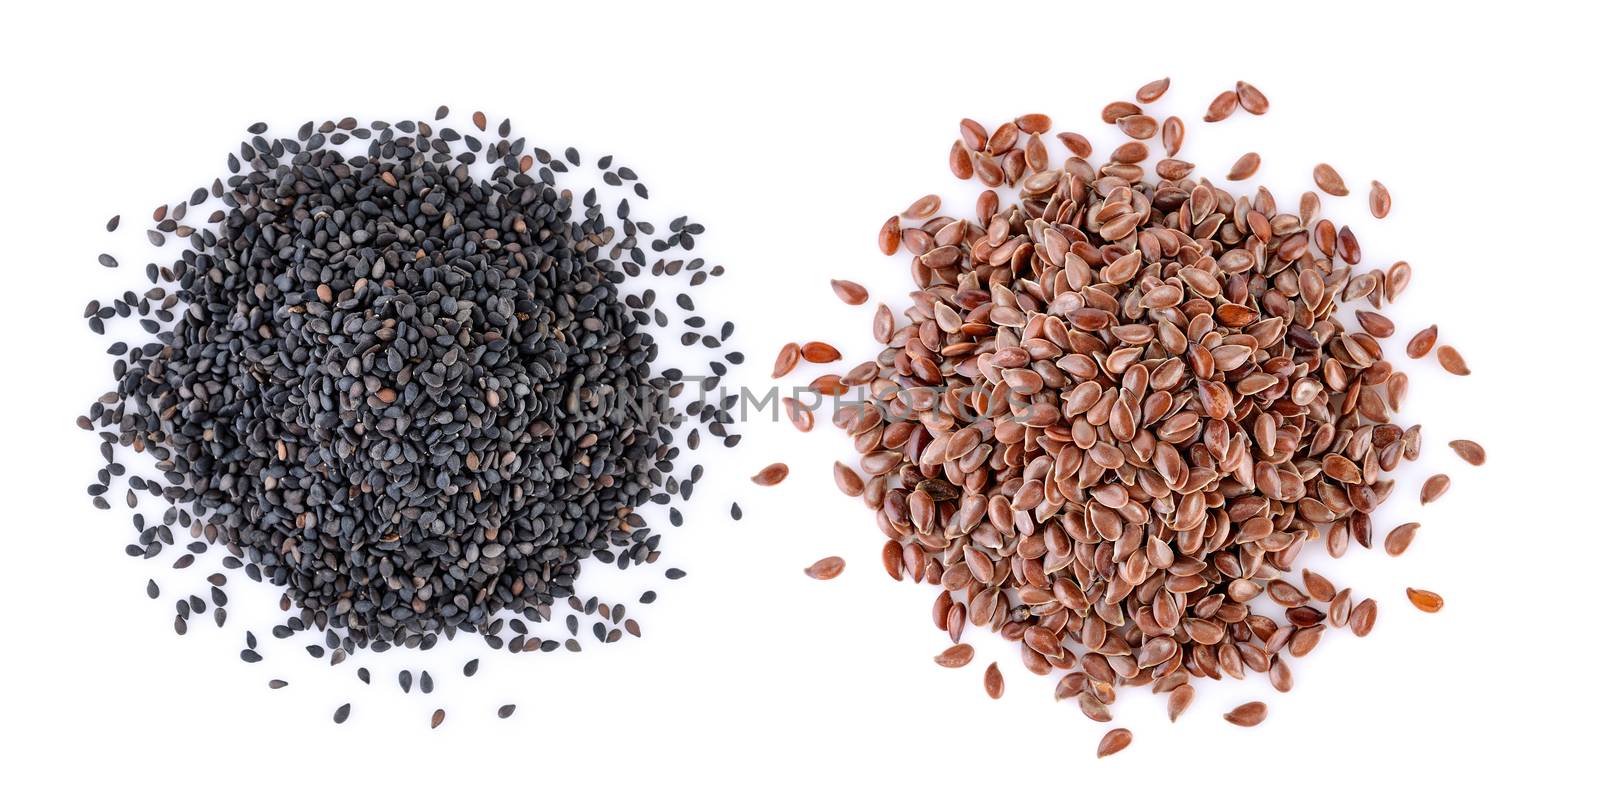 sesame and Flax seeds heap on white background